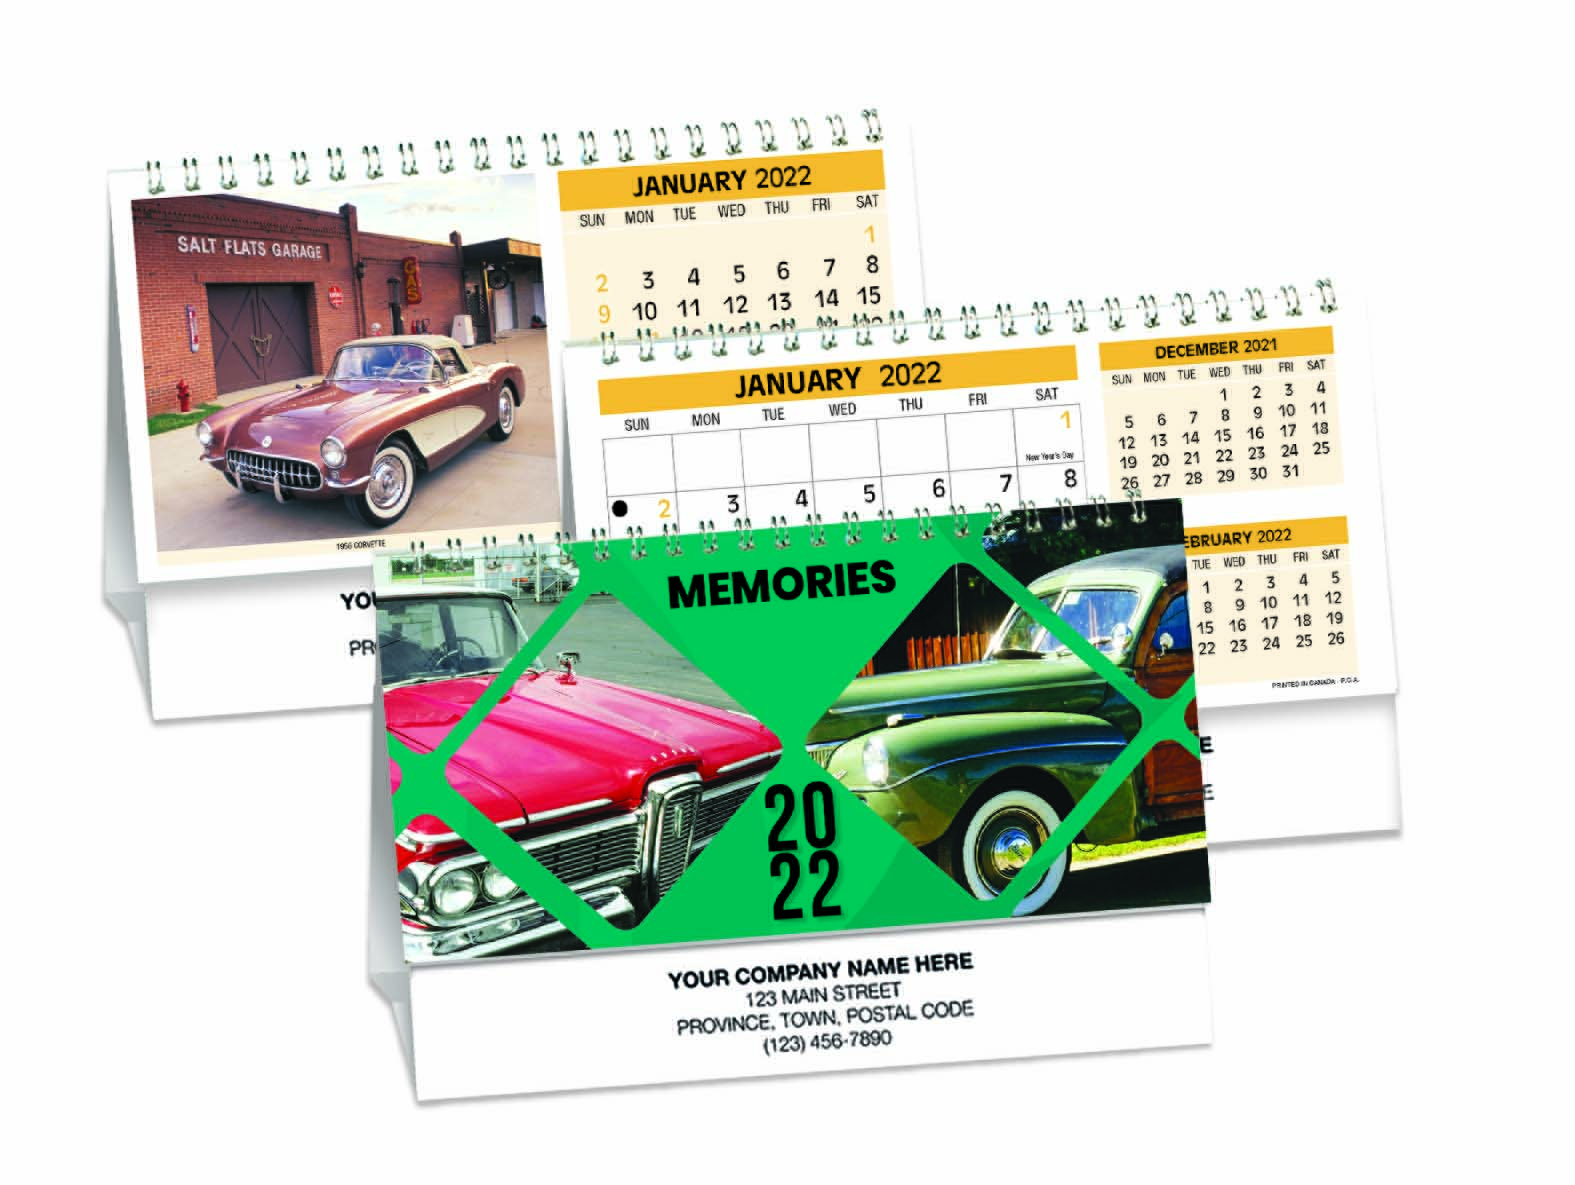 This customized 2022 antique car calendar is a desk calendar that suits any office really well if you are a car enthusiast.